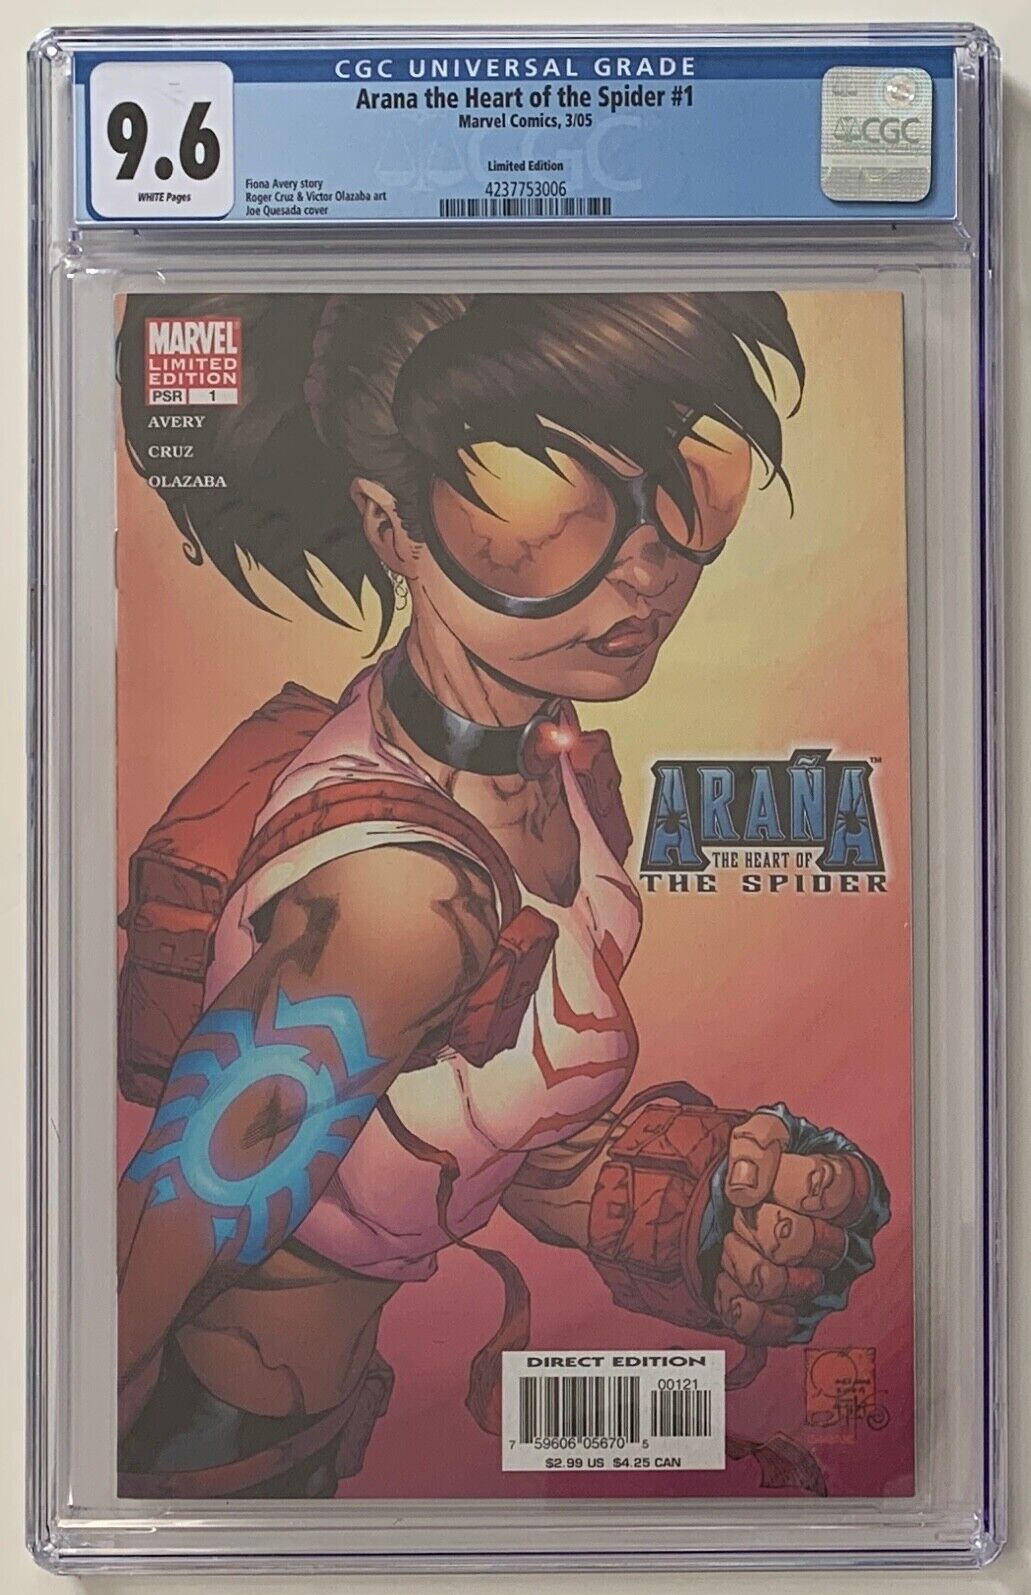 Arana The Heart of the Spider 1 Limited Edition CGC 9.6 NM+ Marvel Comics 2005